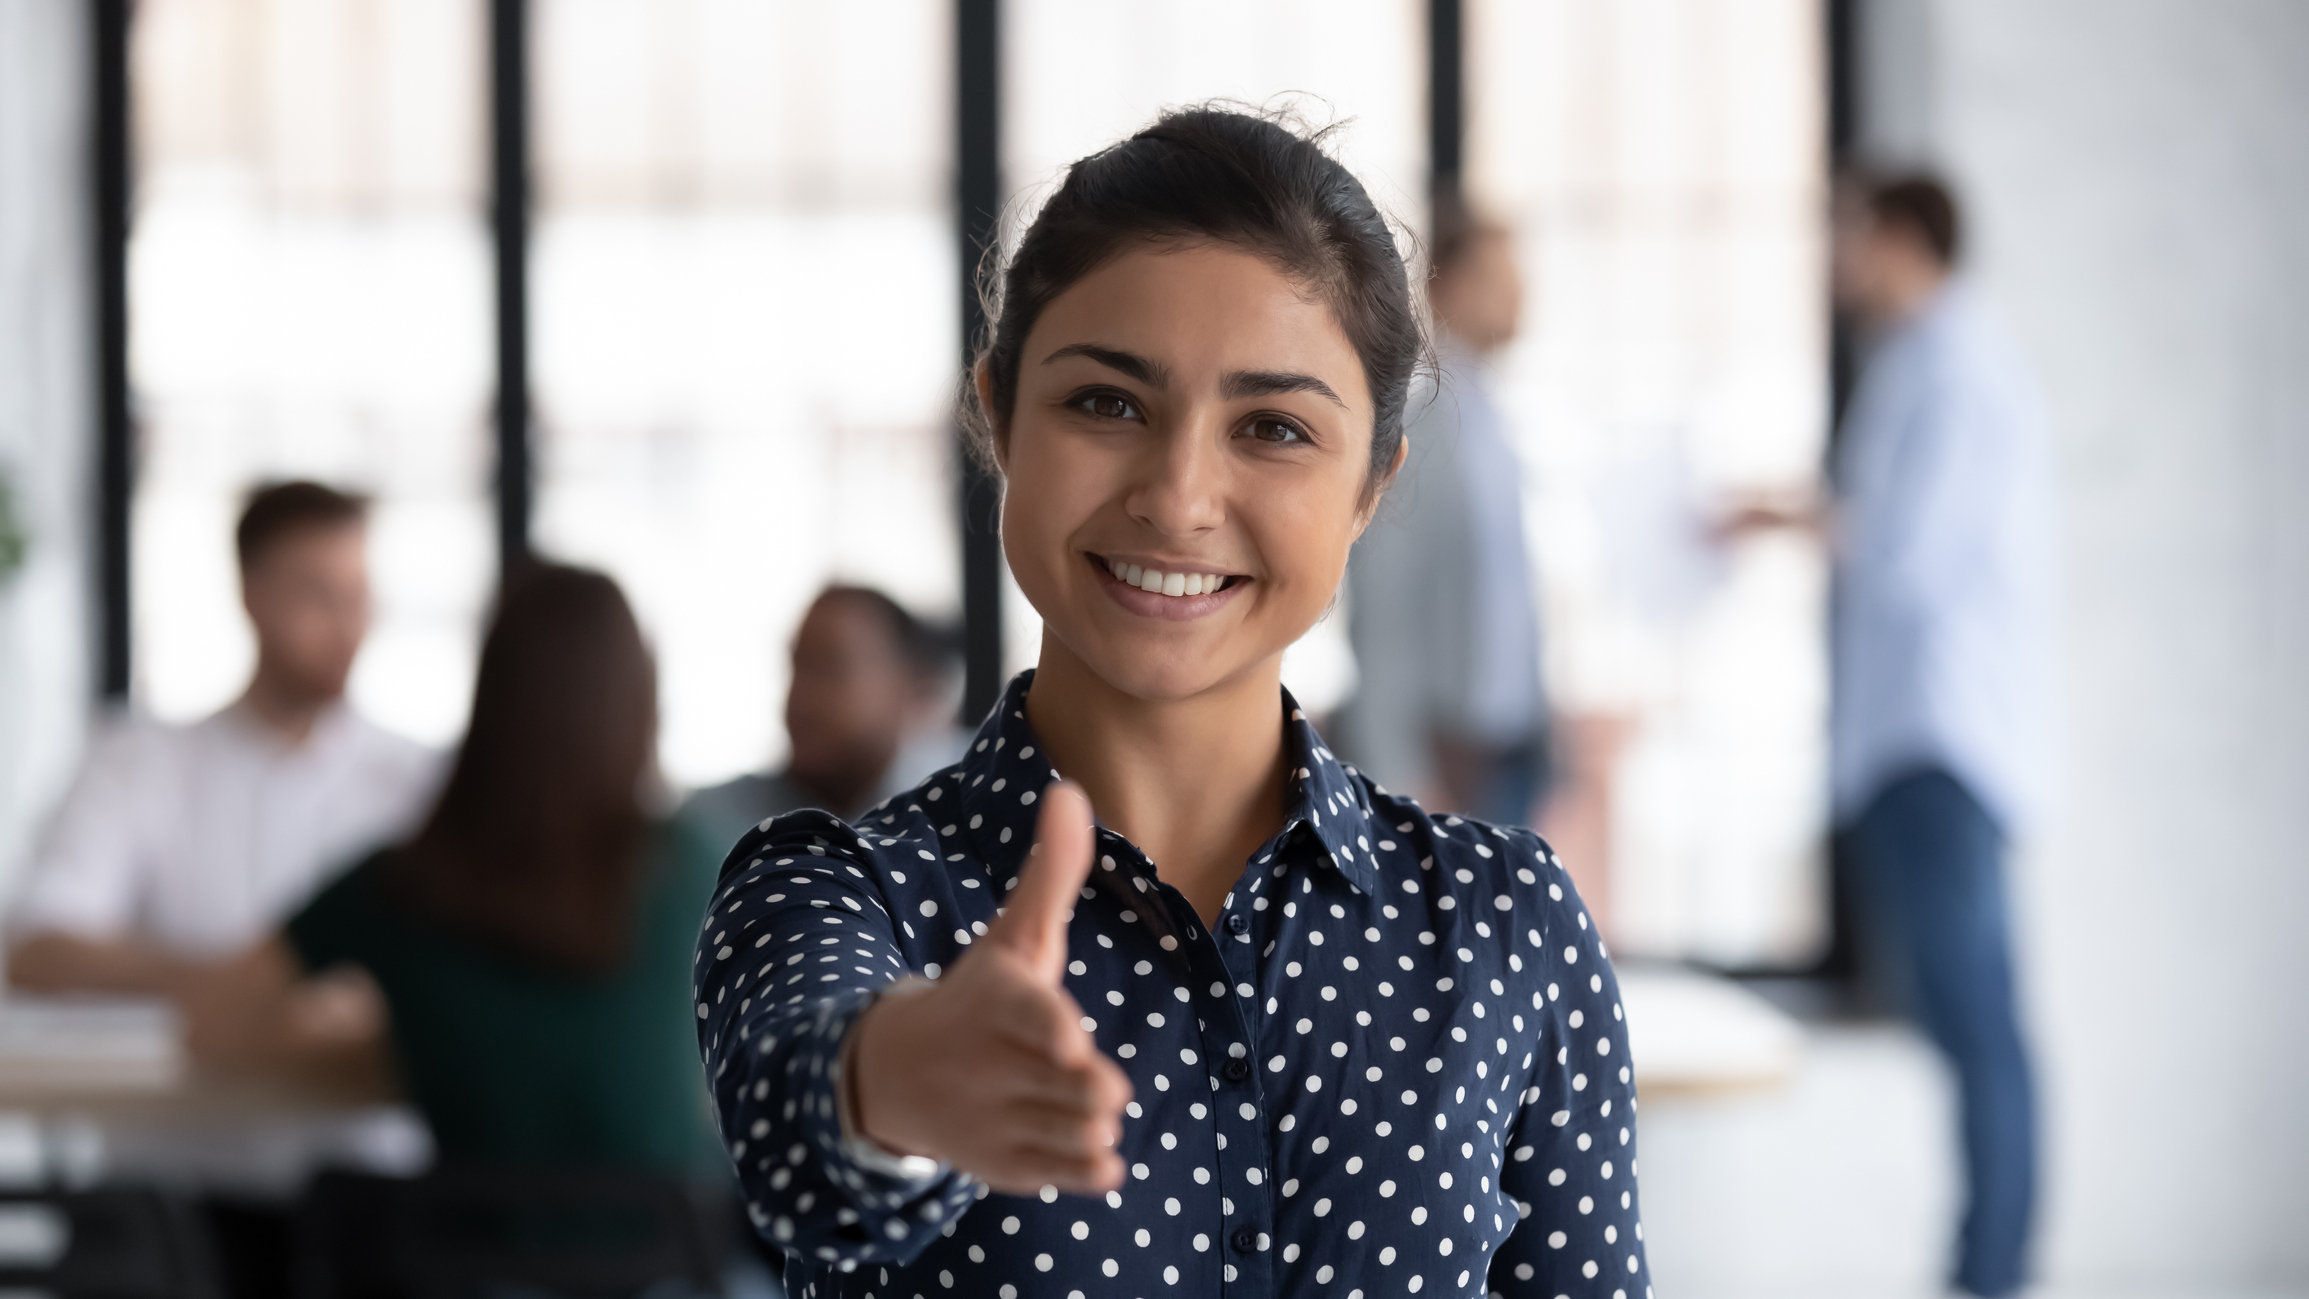 Stock image of an Indian business woman in a busy office extending her hand as to shake hands with the camera person